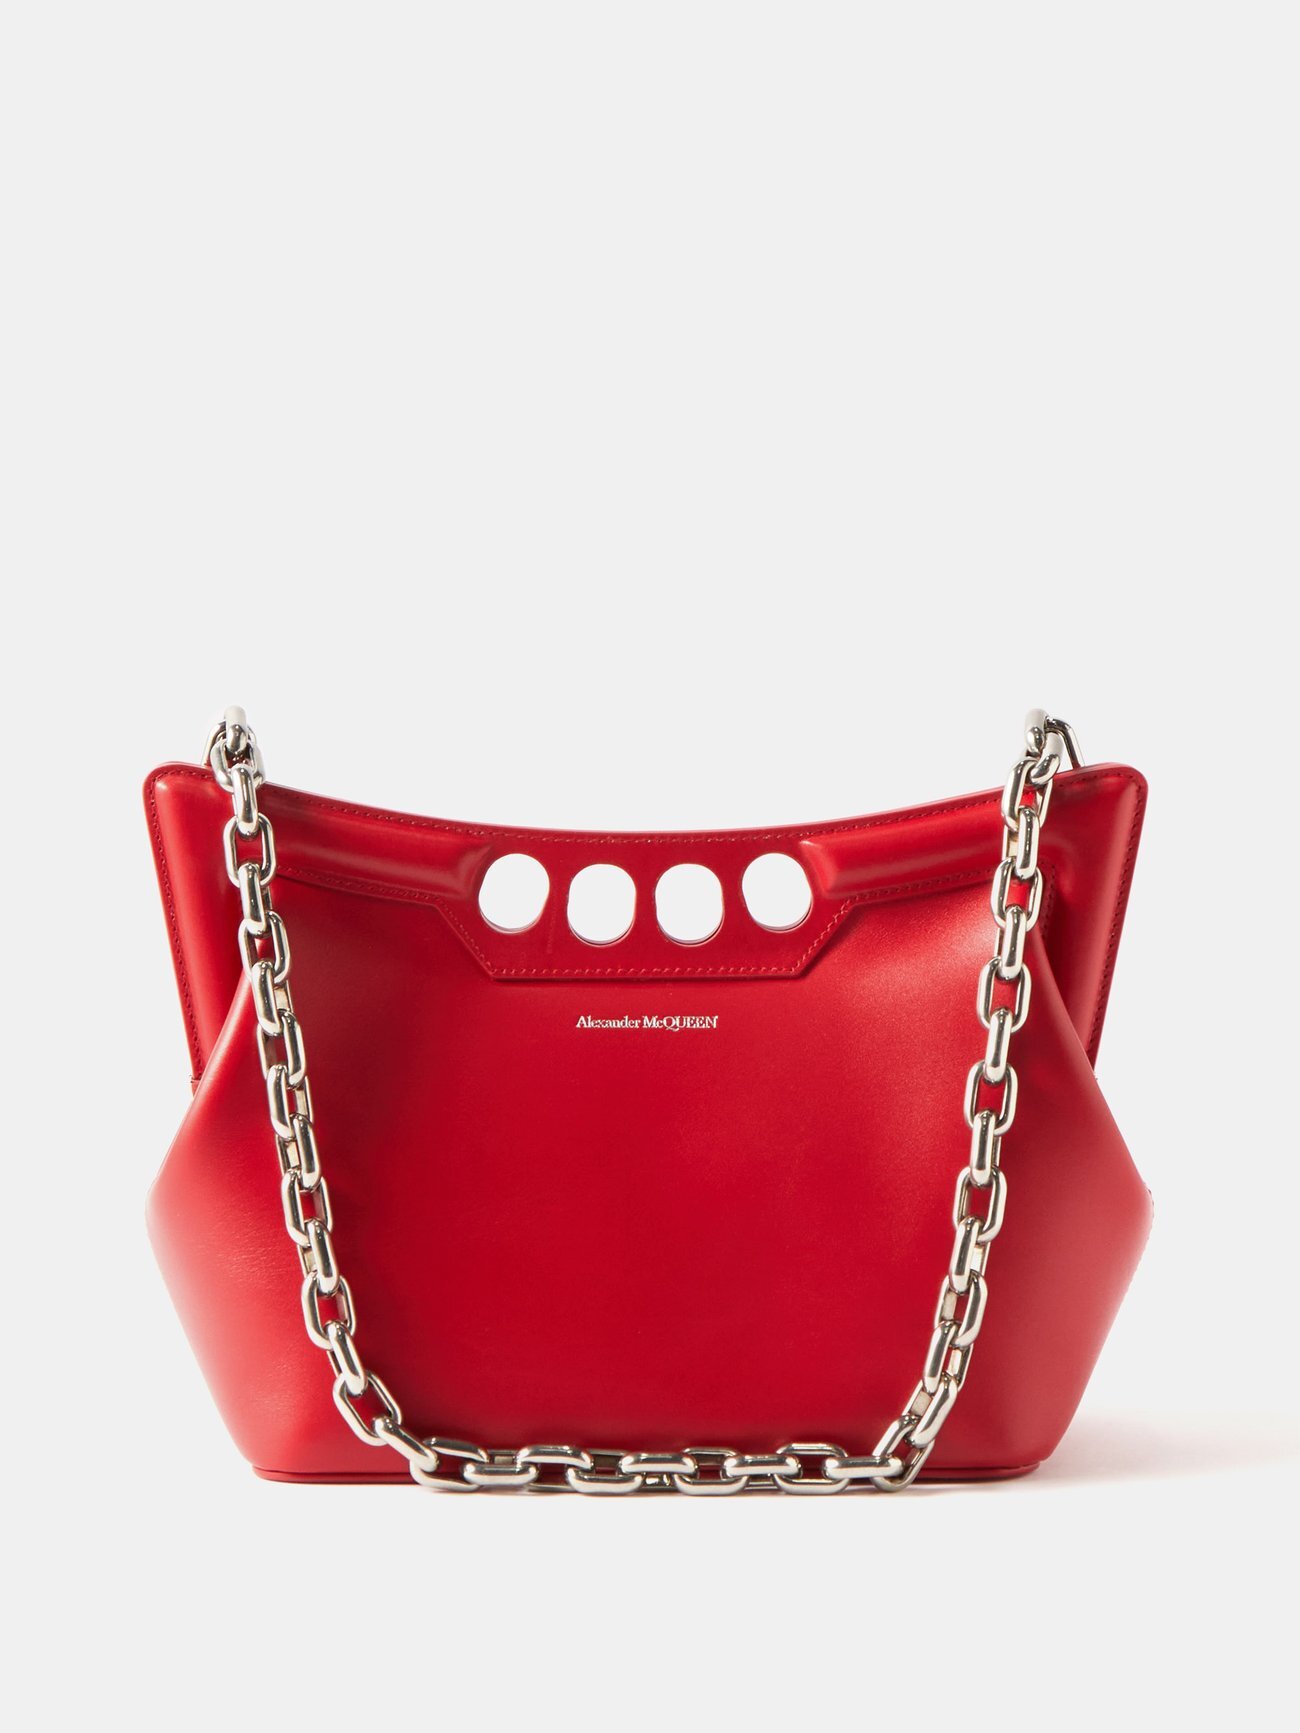 Alexander Mcqueen - The Peak Small Leather Shoulder Bag - Womens - Red